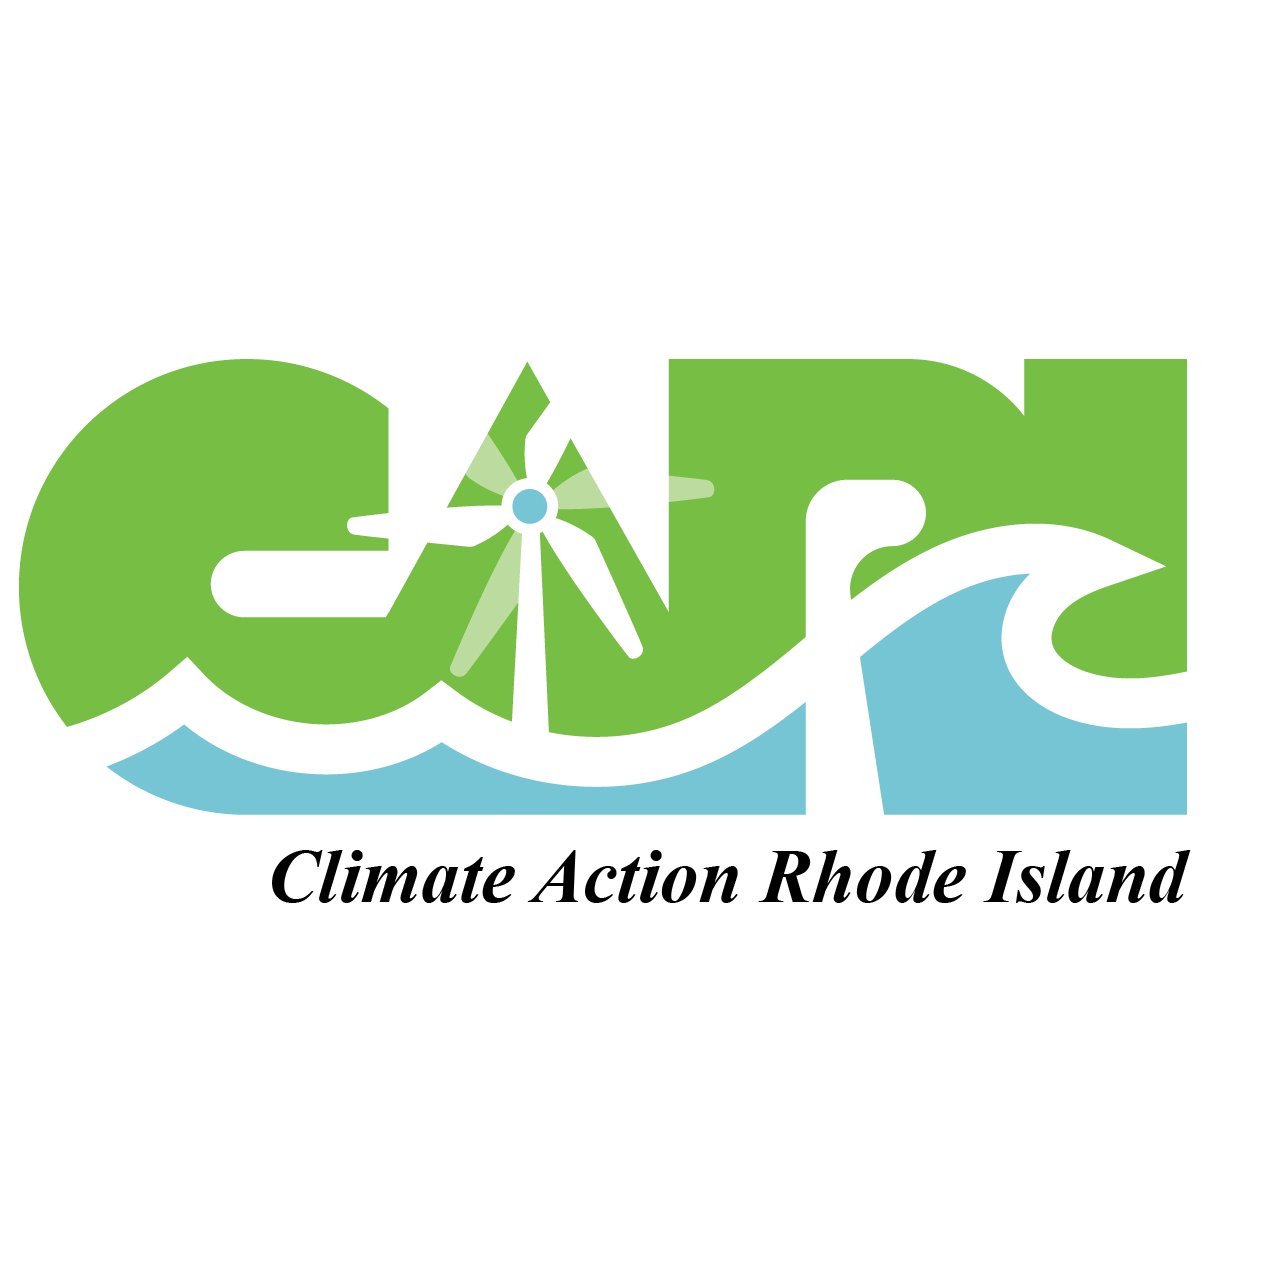 We're the Rhode Island affiliate of https://t.co/Qs2lkdJWjV, fighting for clean energy and climate justice through political advocacy and direct action.

Most t